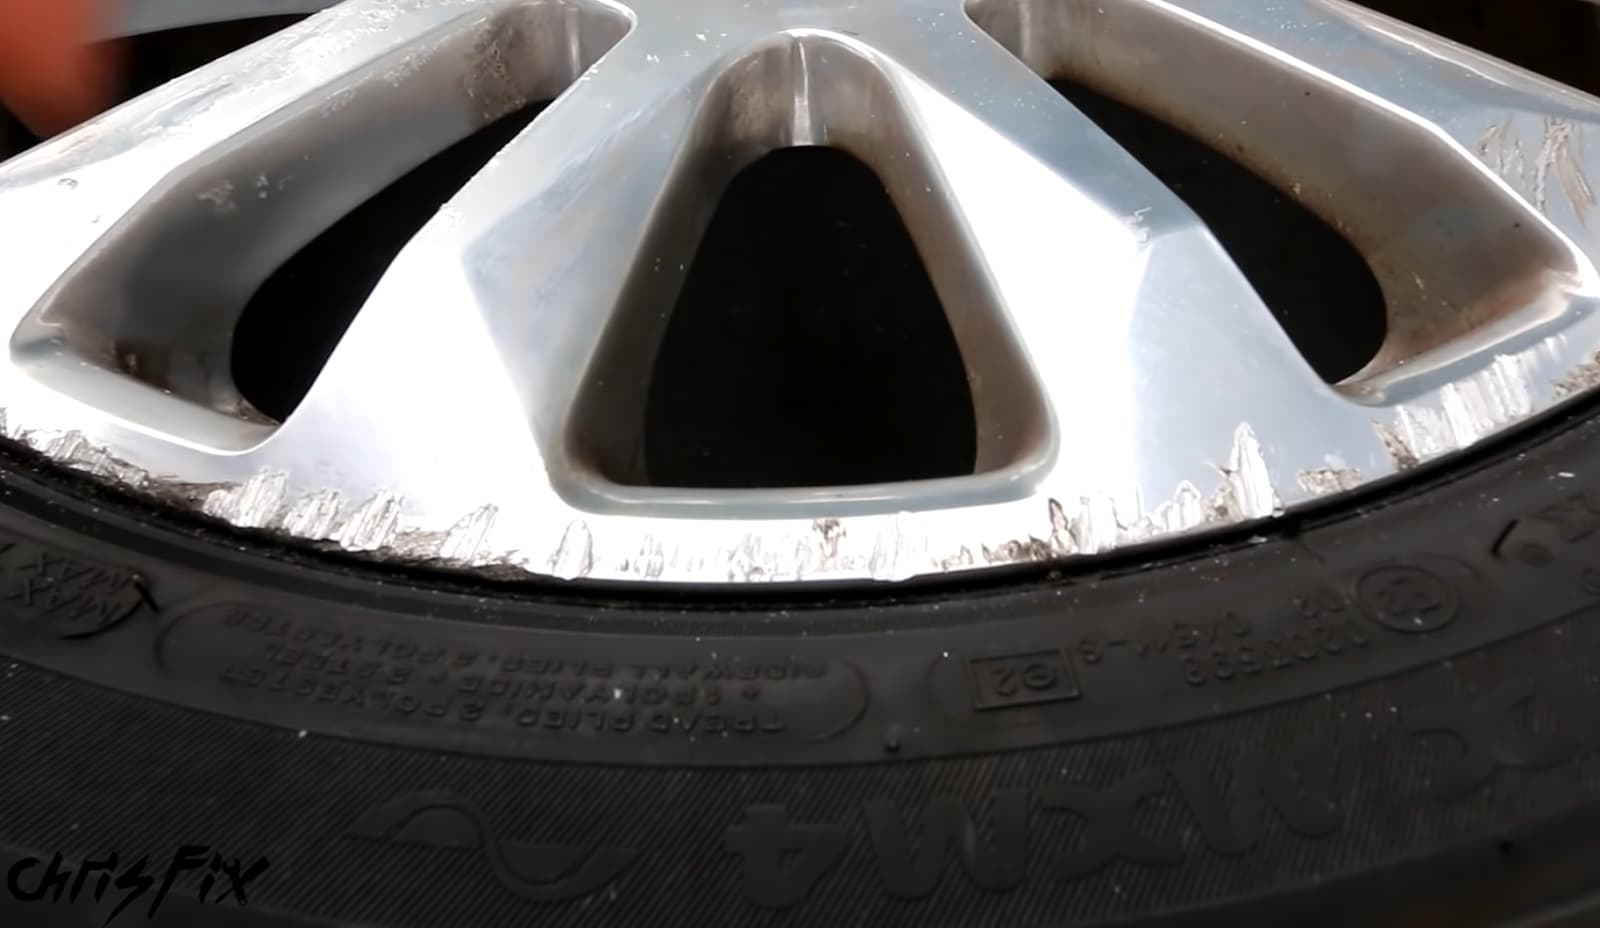 A close-up of a car wheel rim showing some wear and damage on it